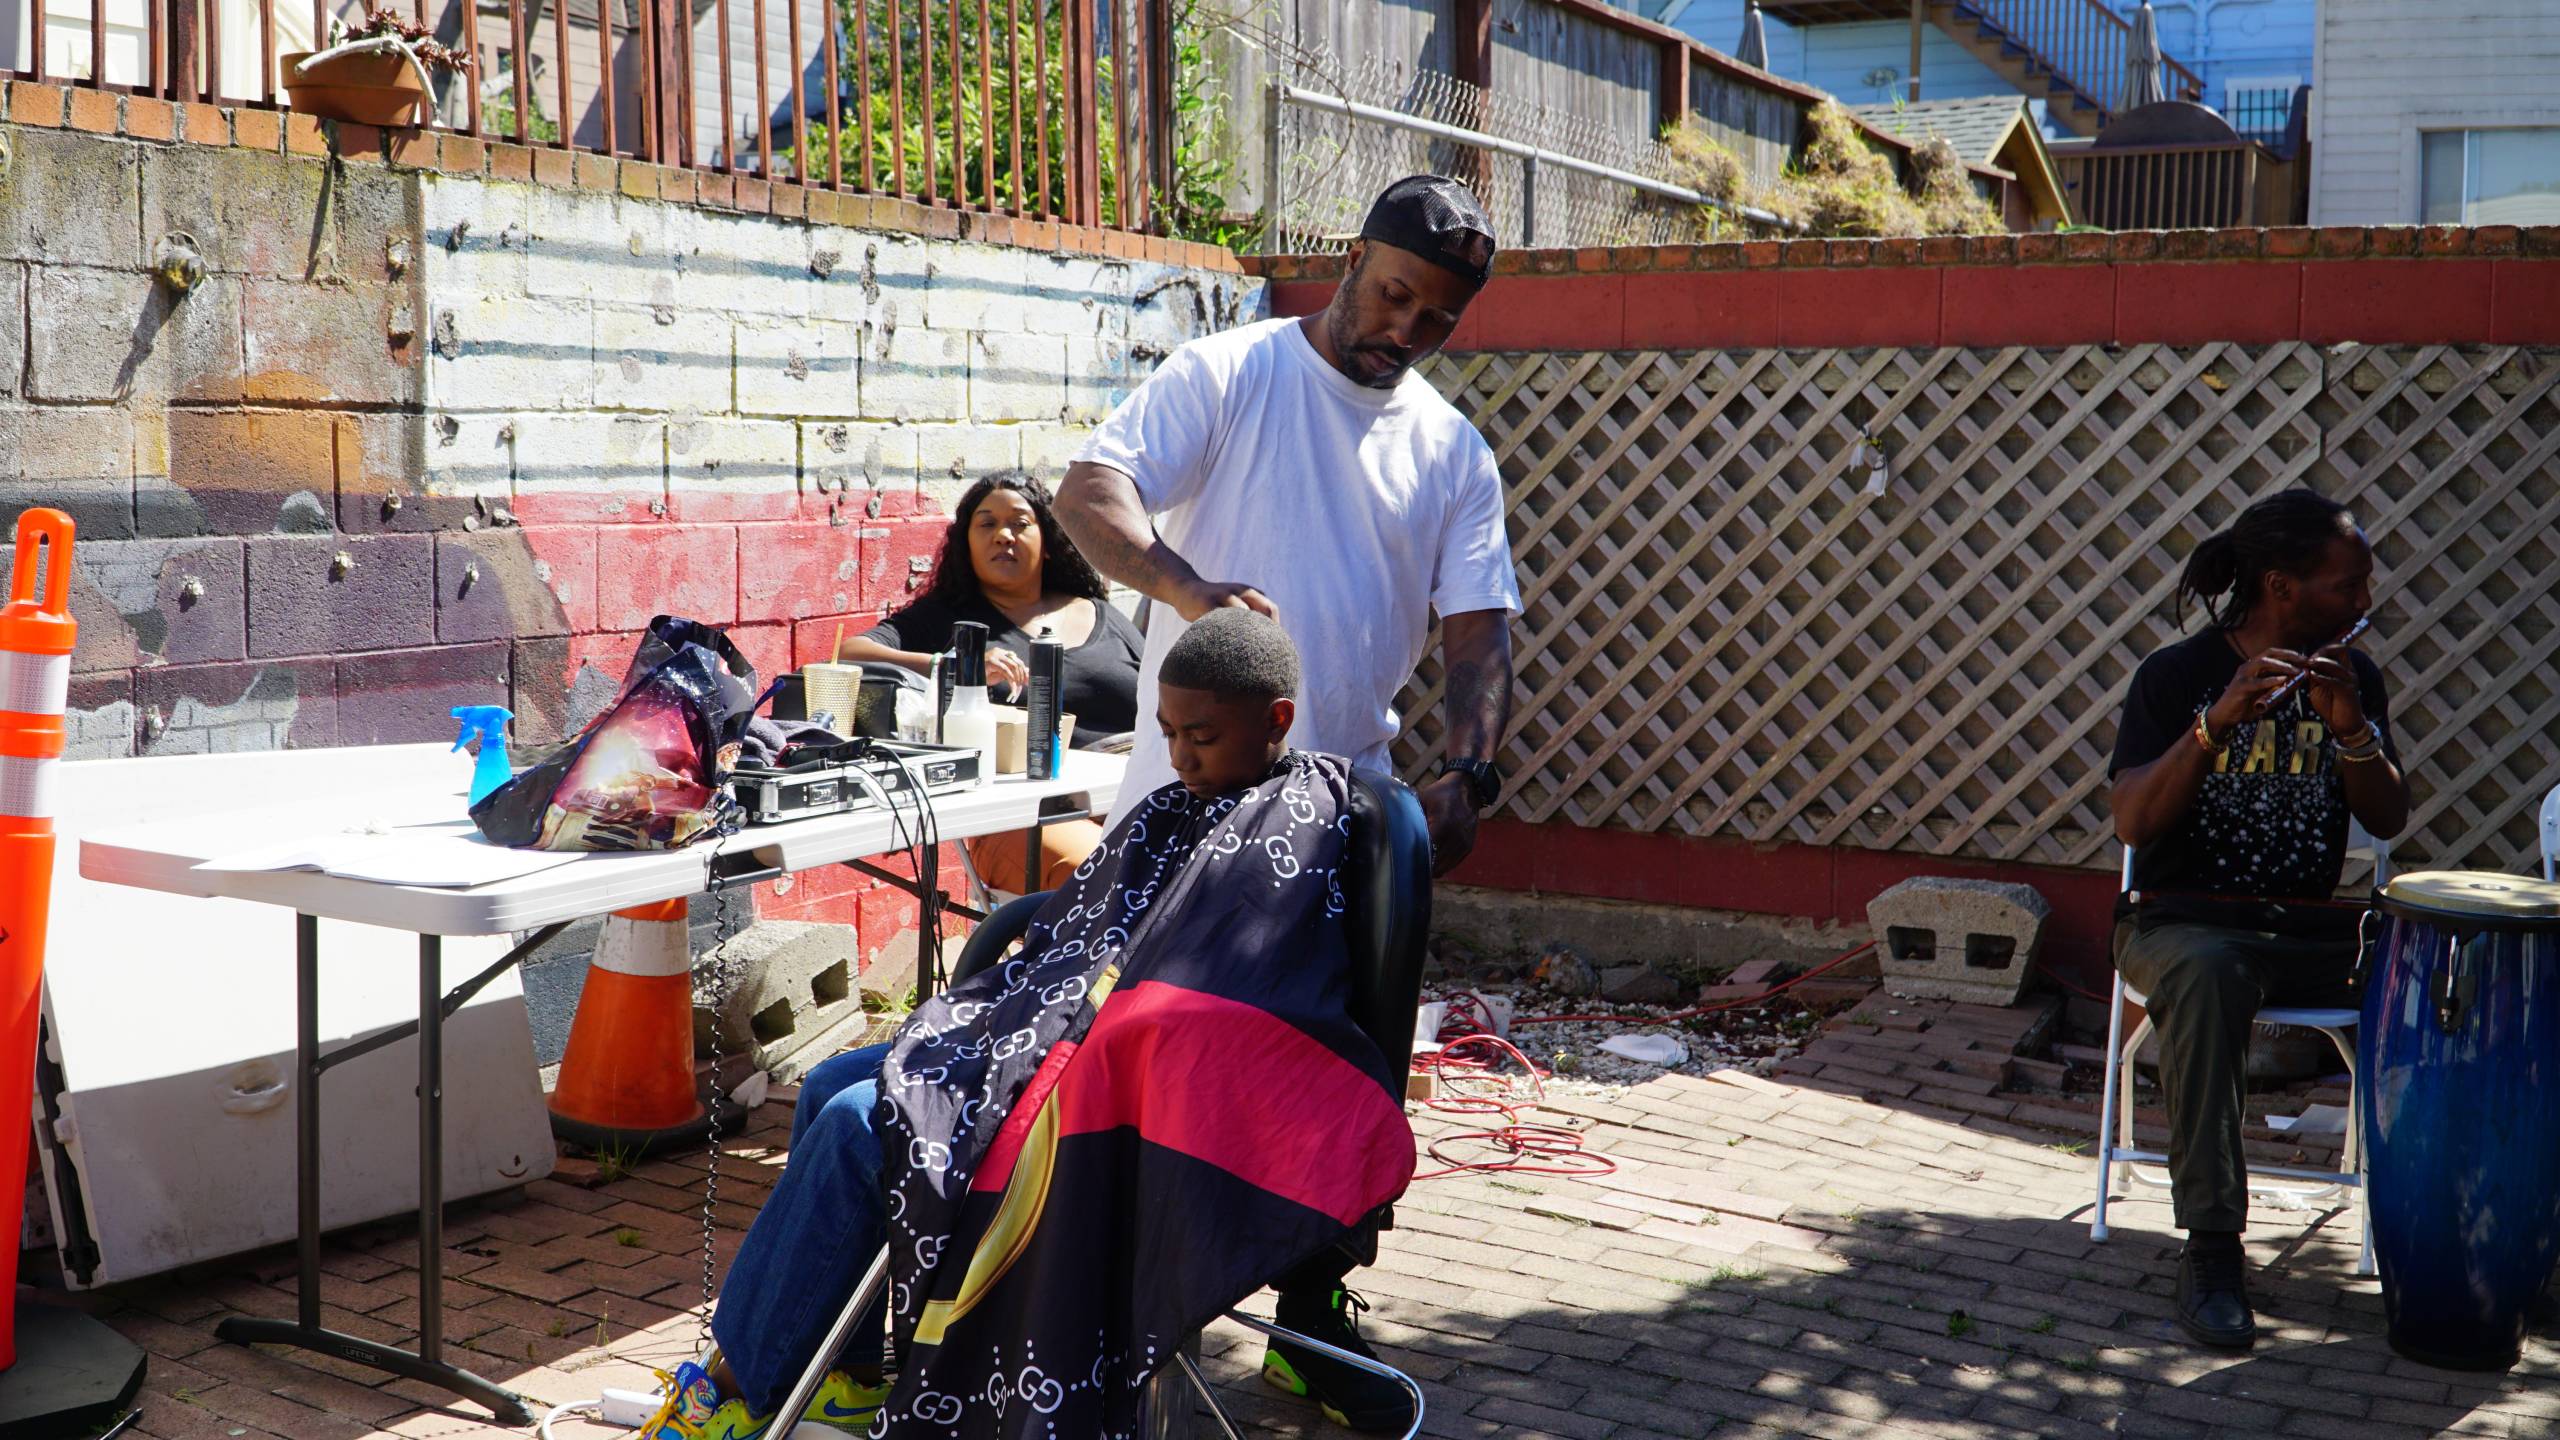 EBlendz da Barber offers free haircuts to people at the Pop-Up Village.